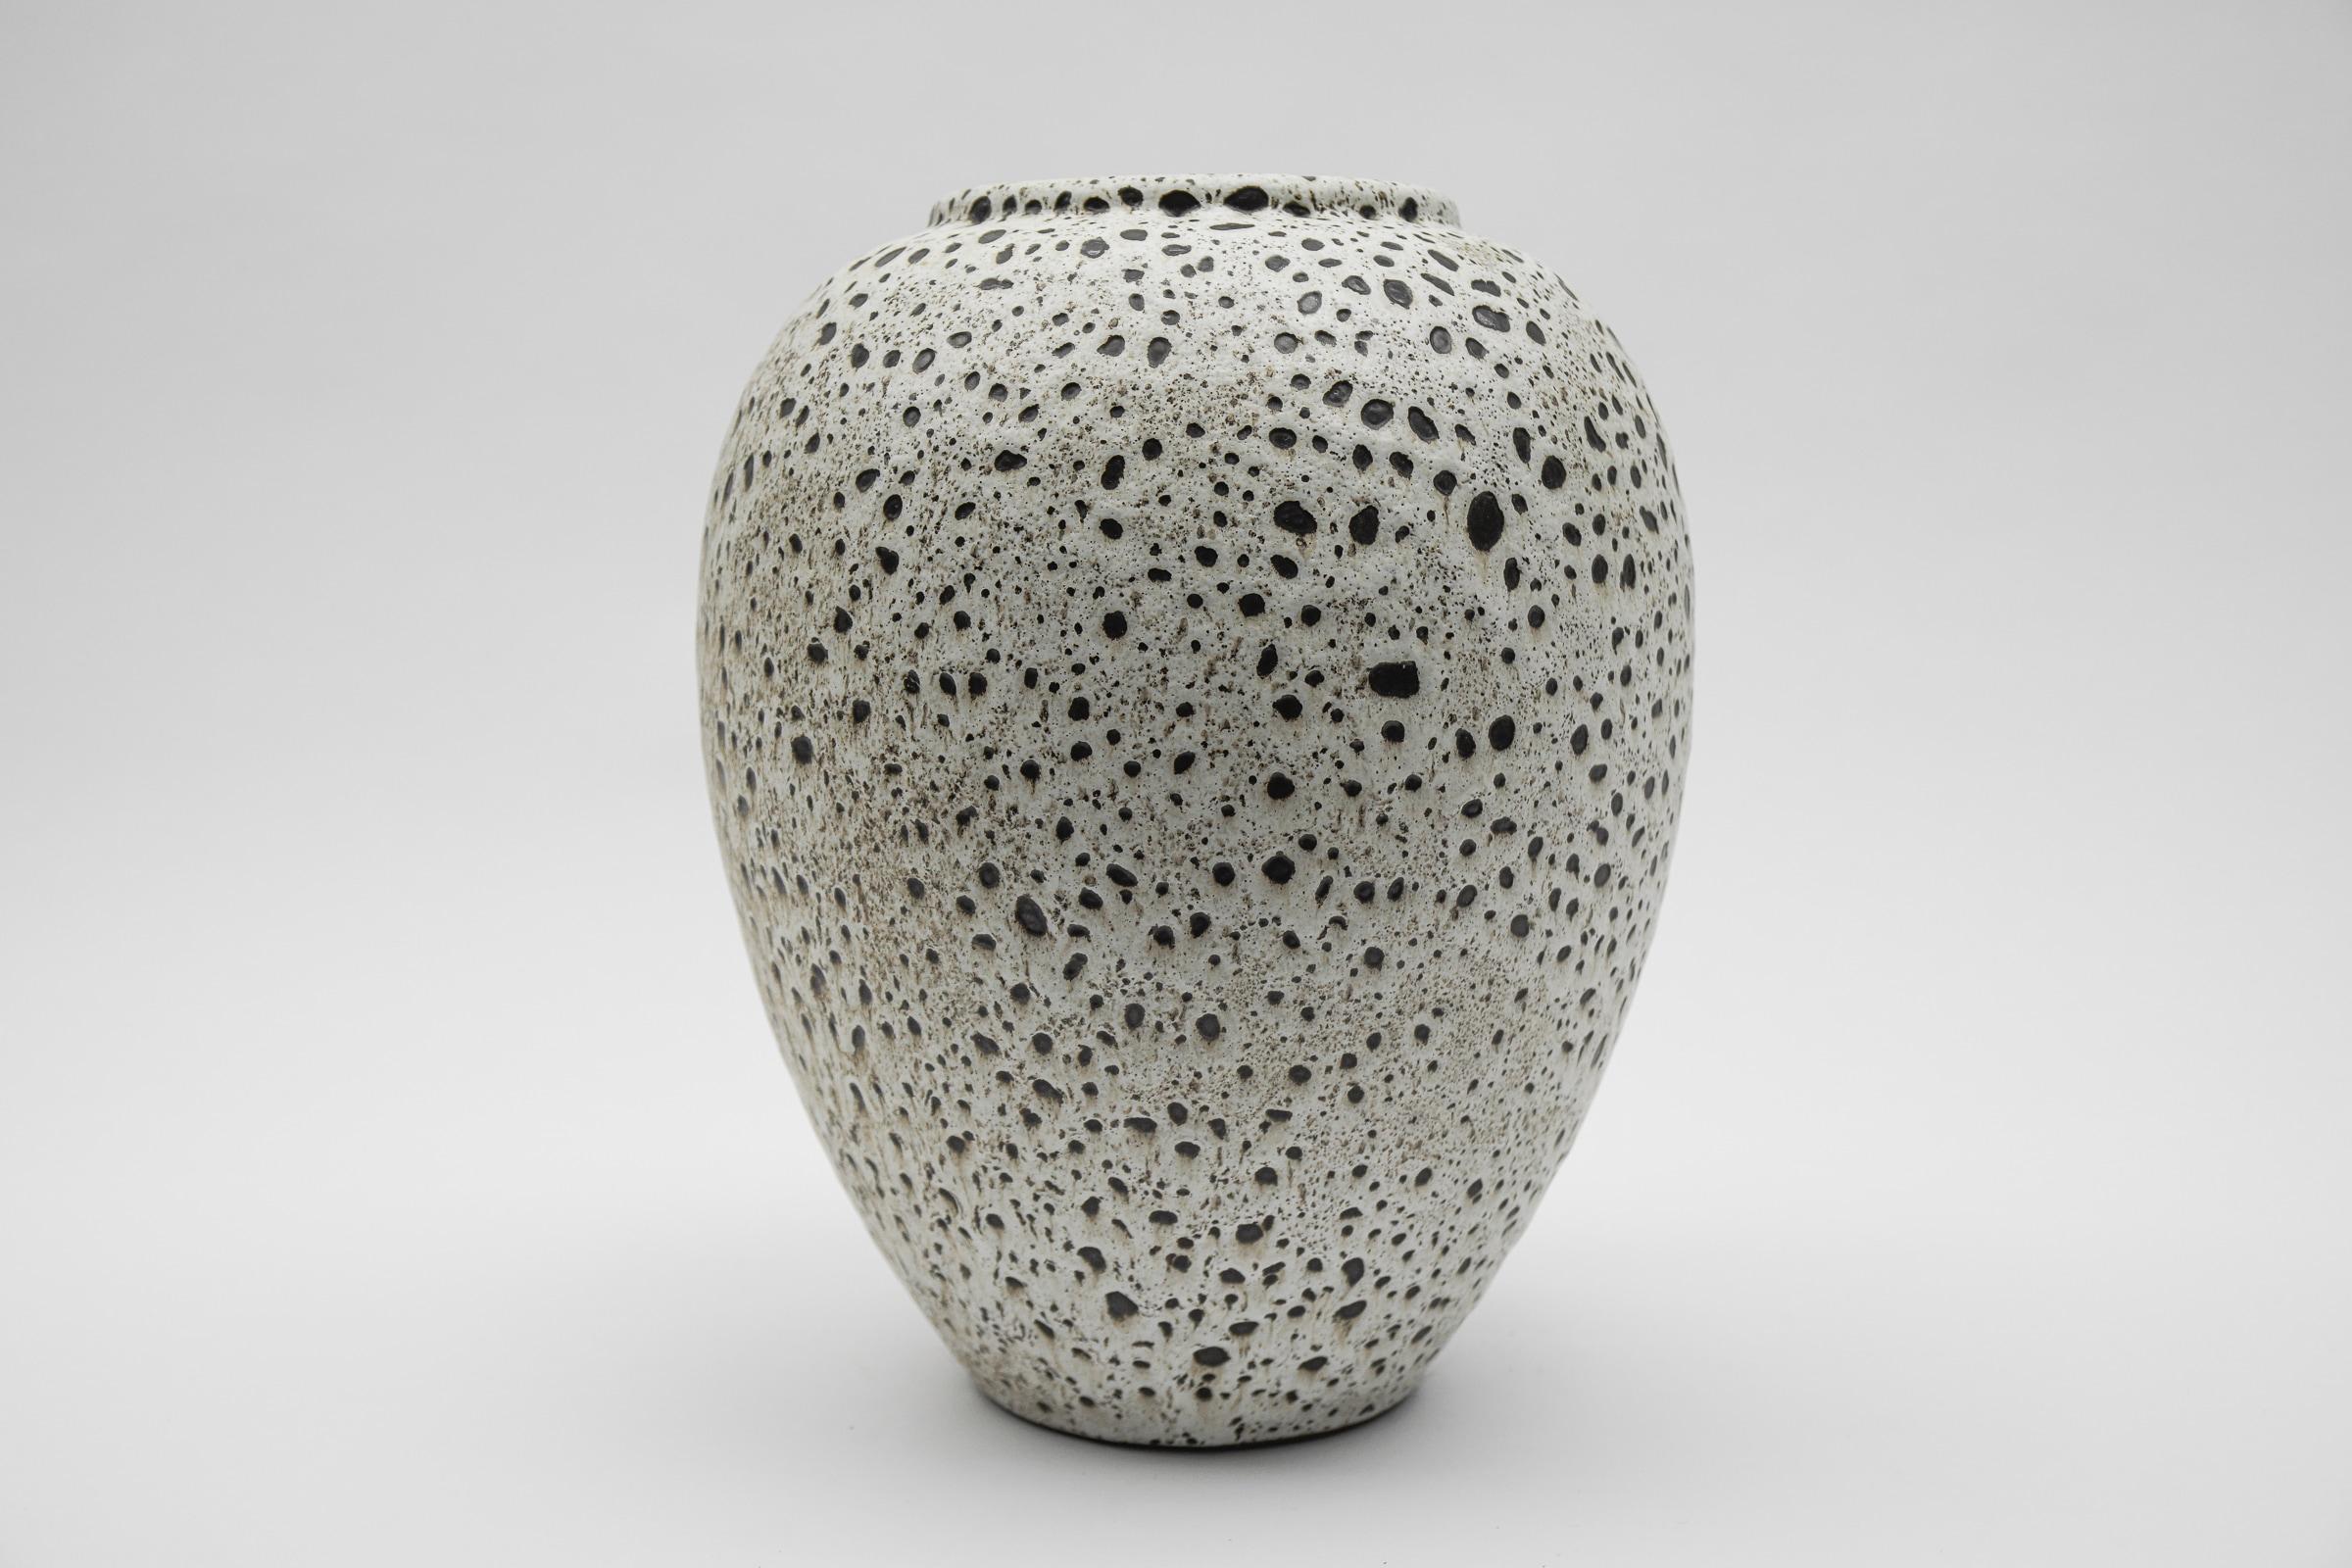 Lovely White & Black Studio Ceramic Vase by Wilhelm & Elly Kuch, 1960s, Germany

We have a whole collection of the series for sale here on the platform. 

Very good condition.

------------------------------

Wilhelm Kuch, born 1925, 1947